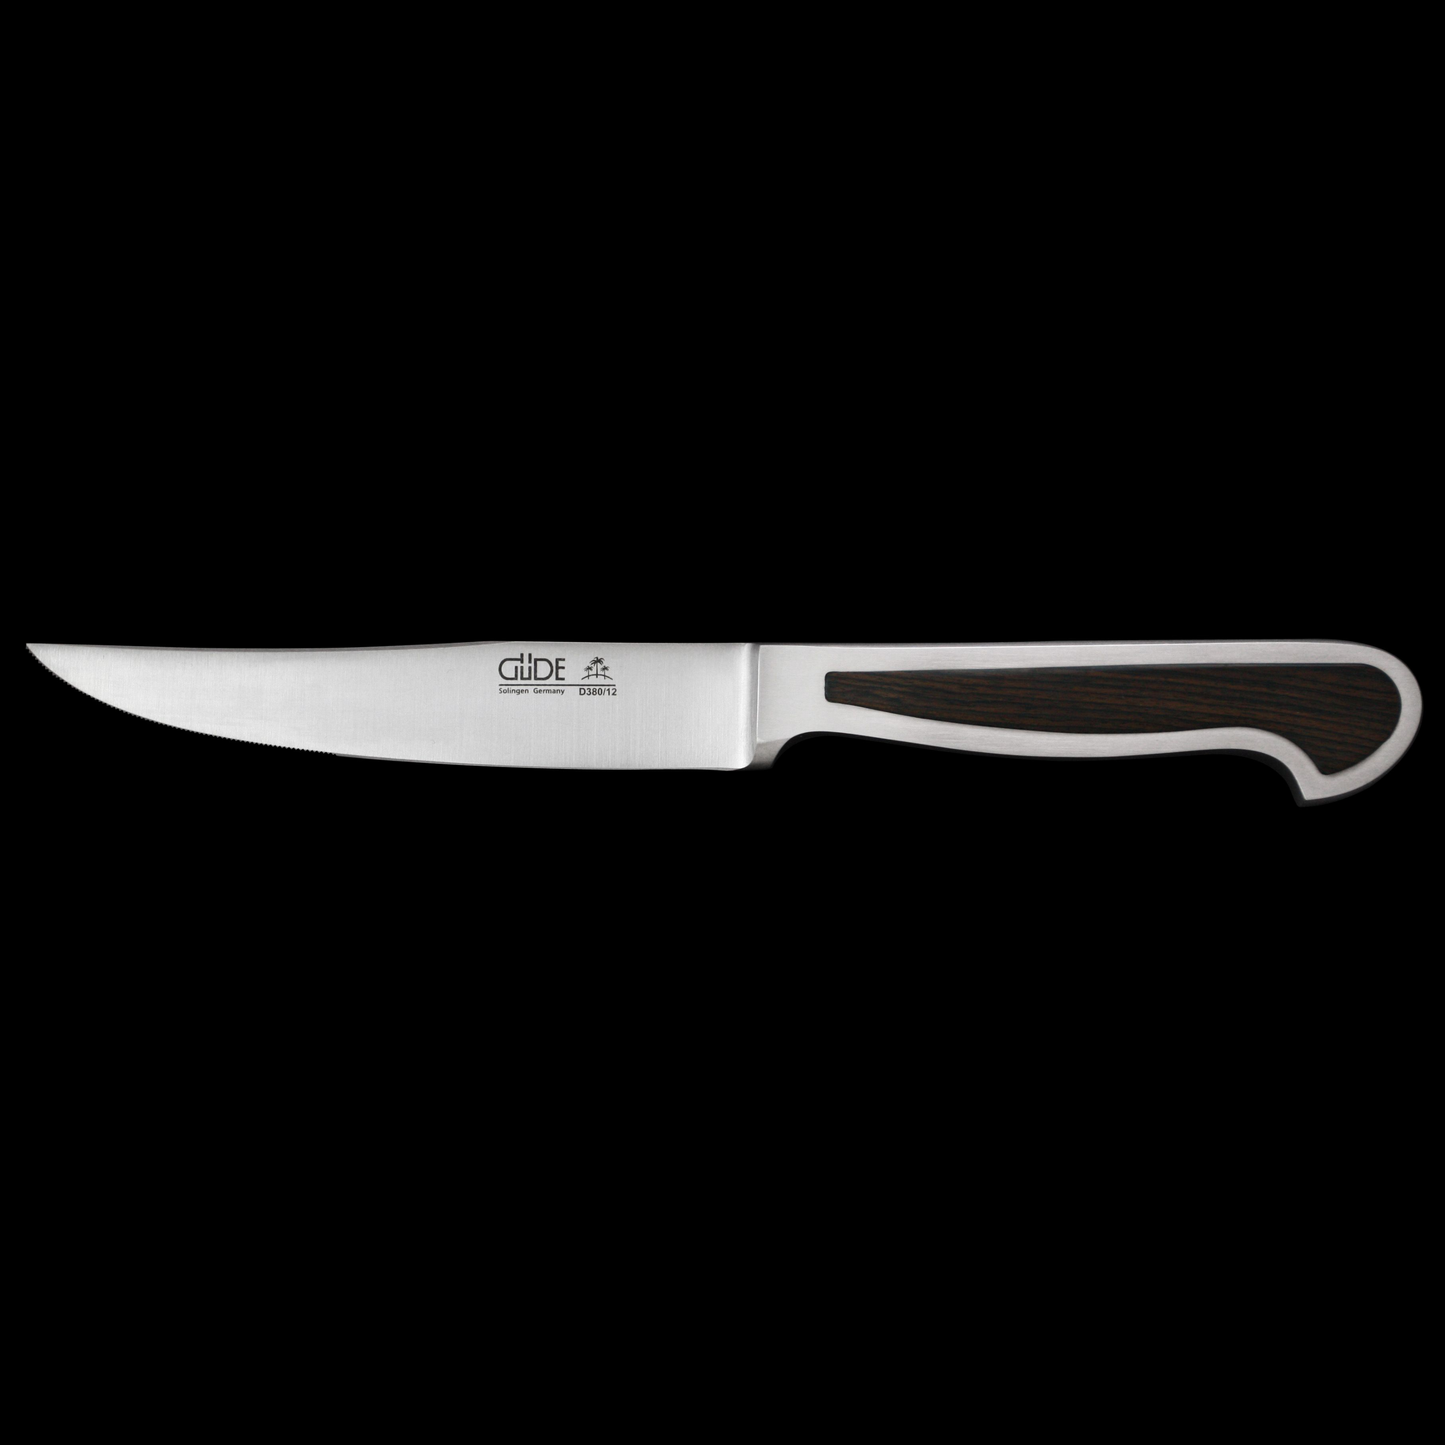 Gude Delta Series Forged Double Bolster Porterhouse Steak Knife 4 1/2", African Black Wood Handle - GuedeUSA